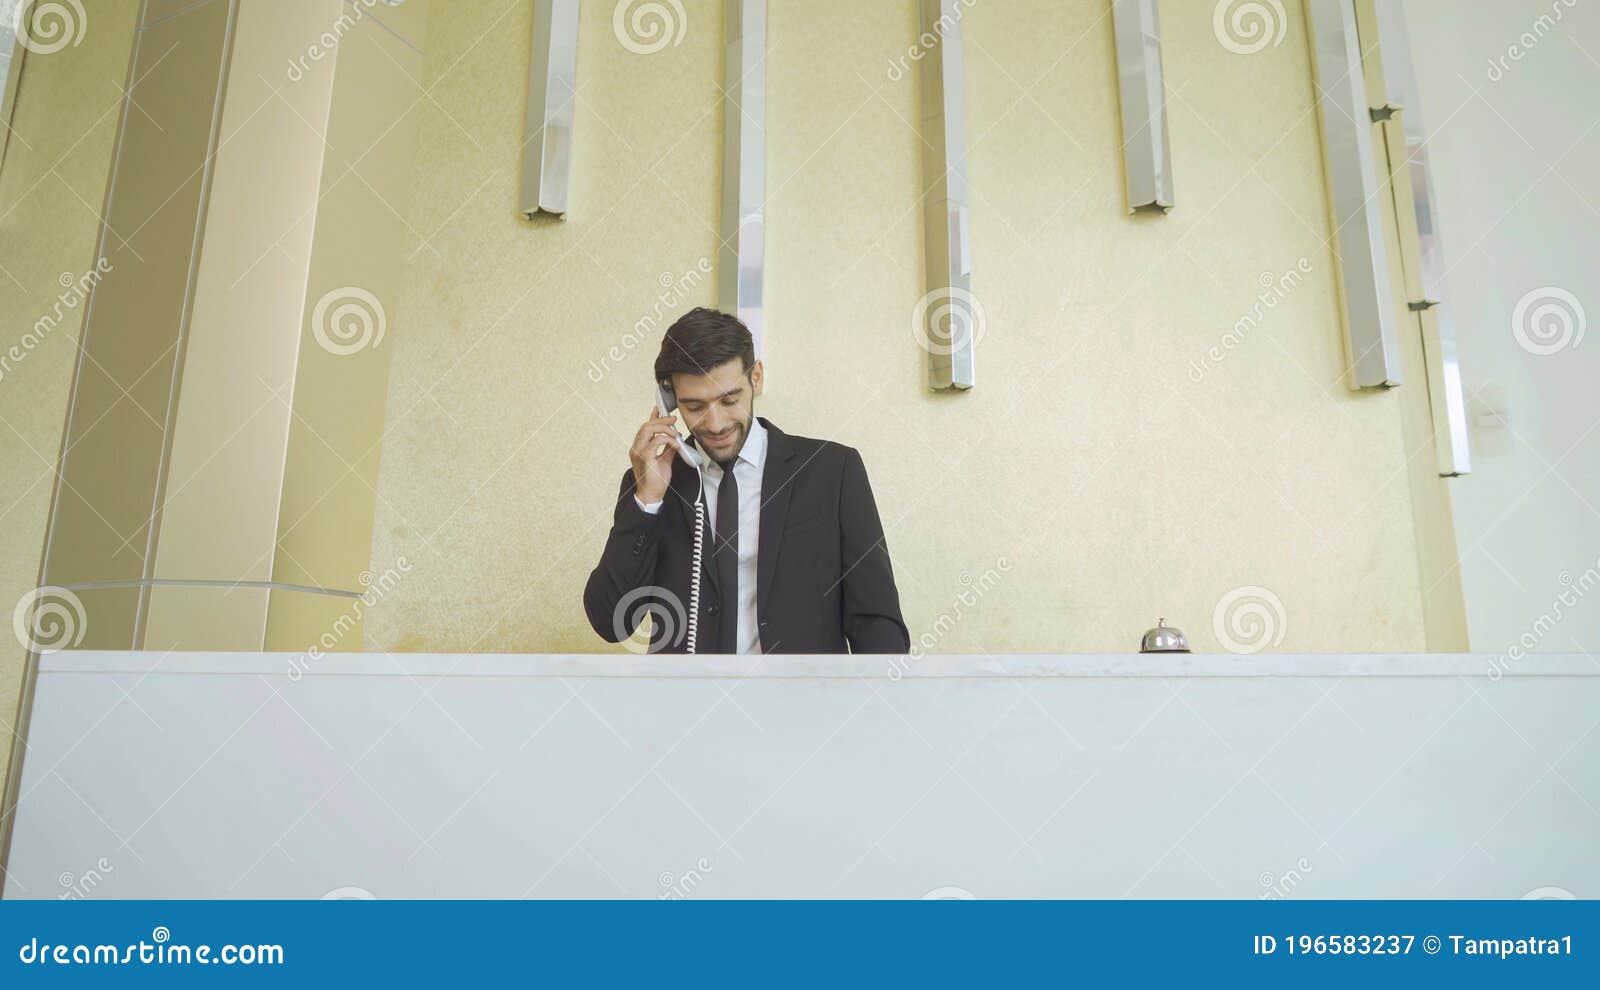 a receptionist or concierge man with uniform at front desk counter in lobby of hotel talking on the phone with guest about the